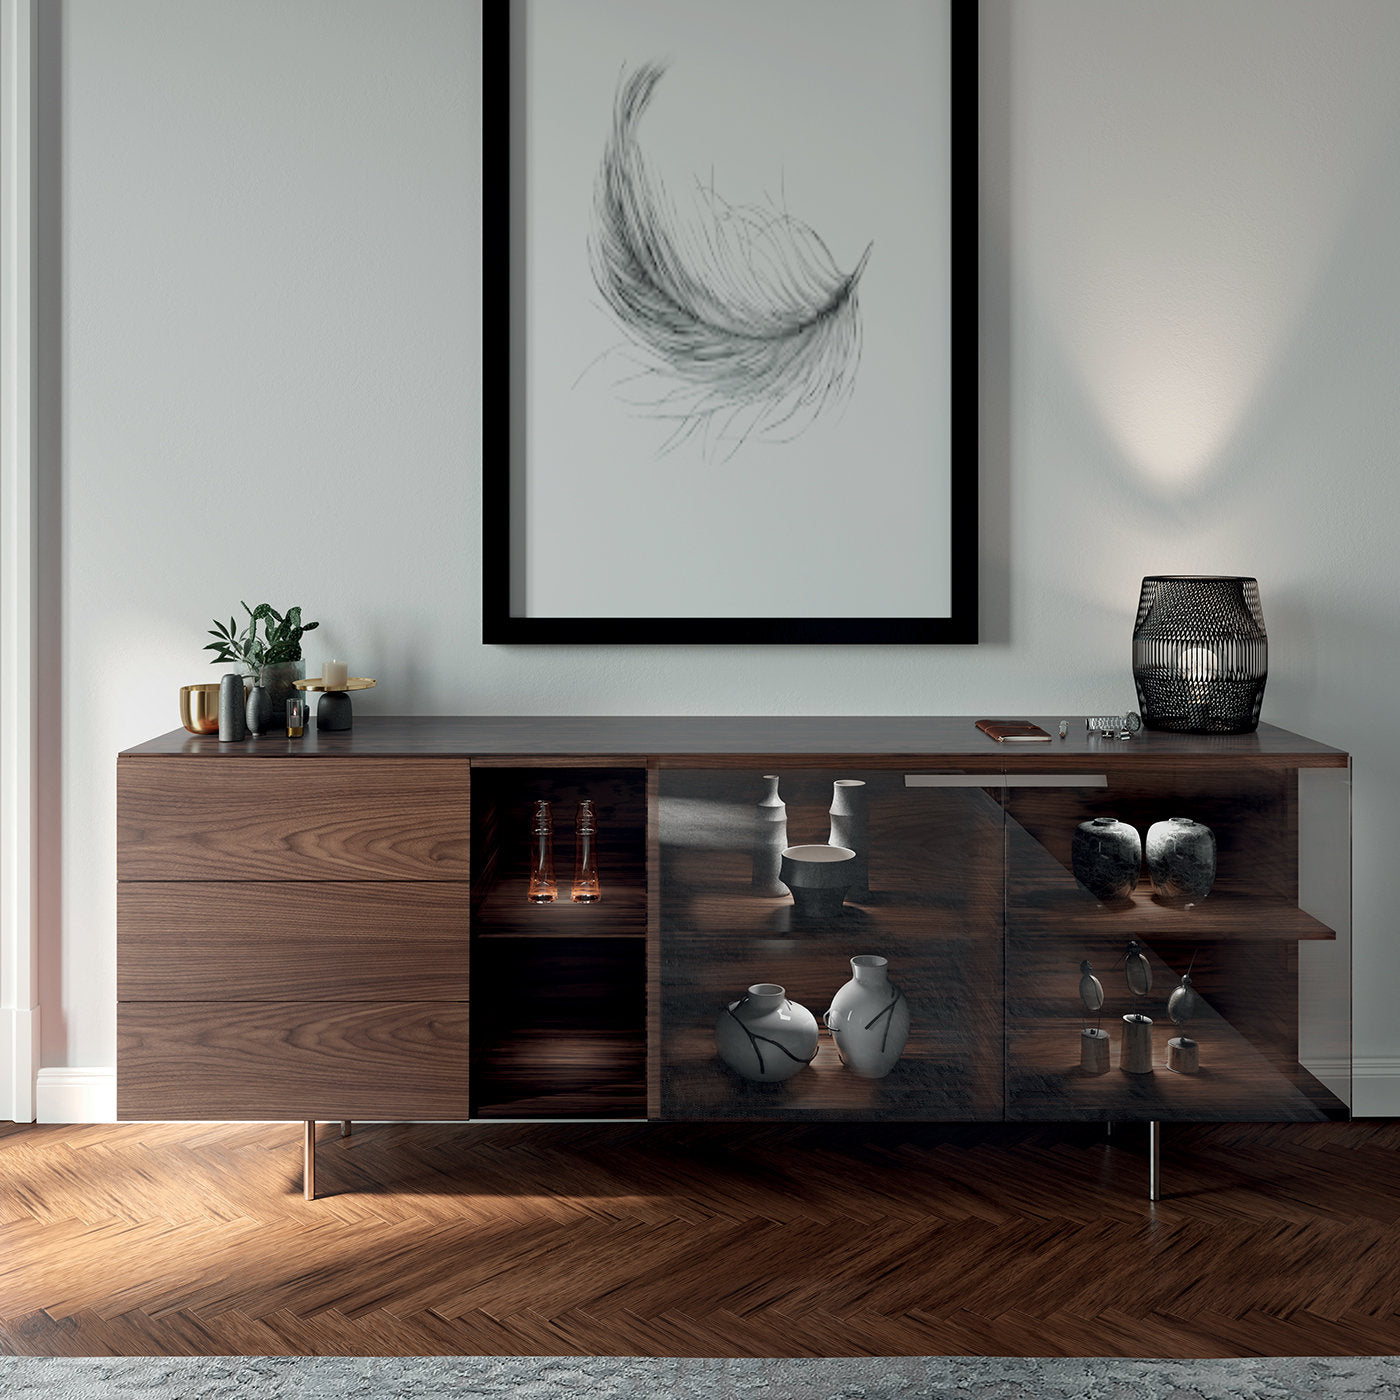 Star Sideboard by Cesare Arosio - Alternative view 1